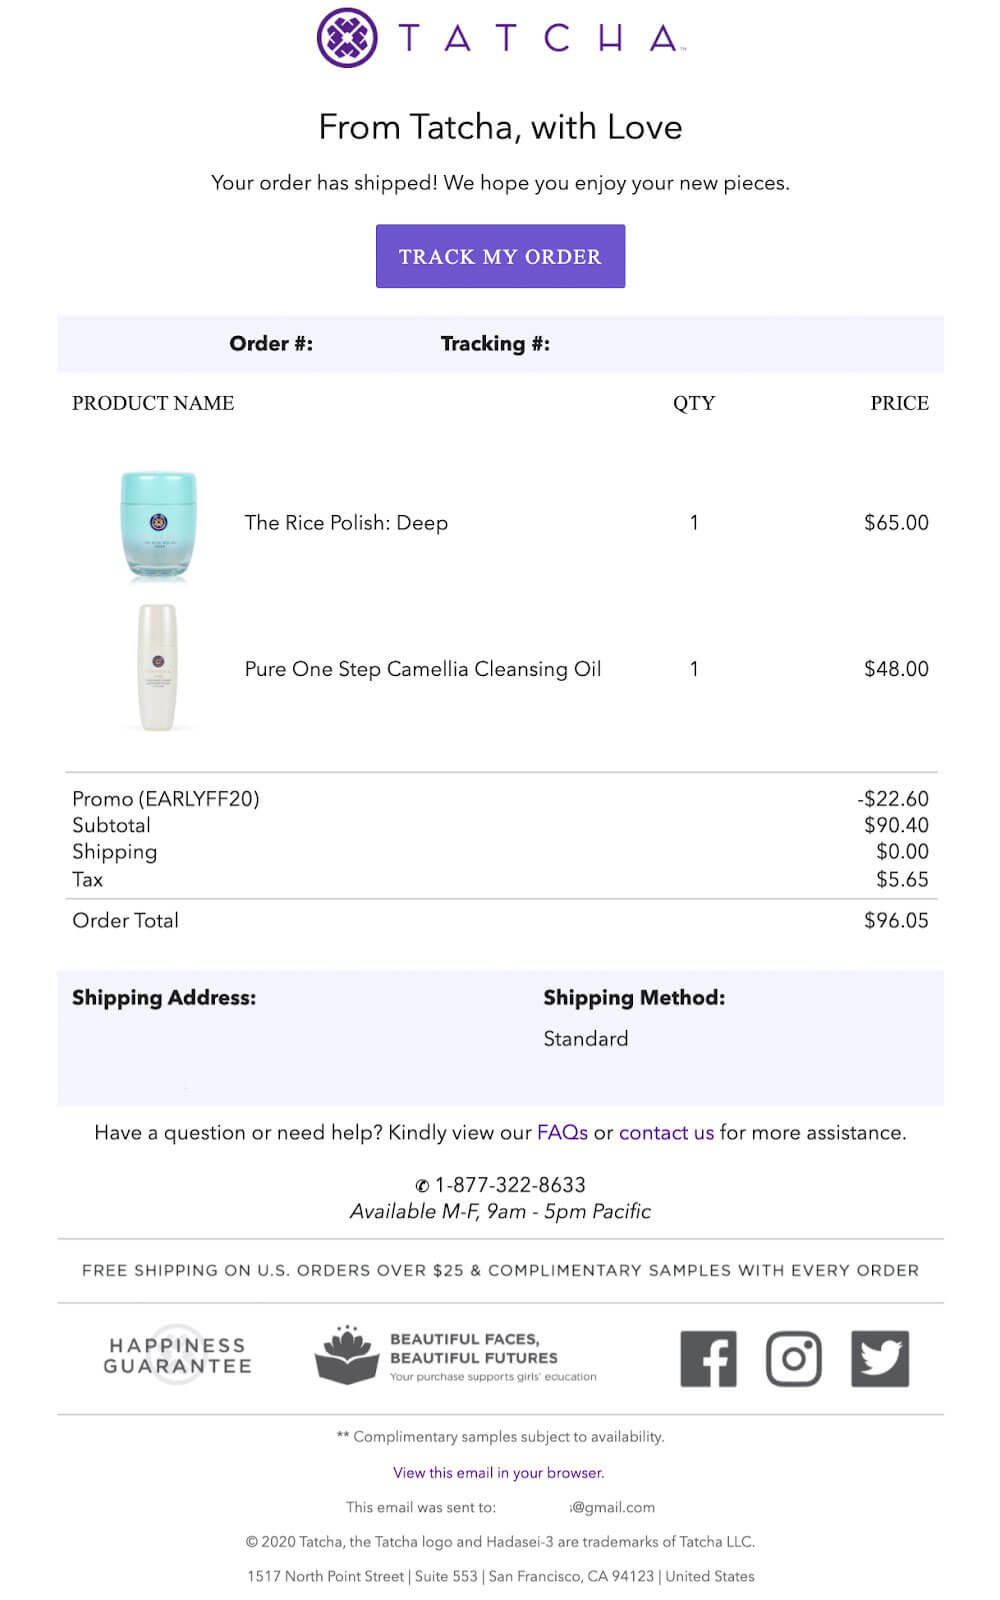 transactional email of tatcha about shipping confirmation 